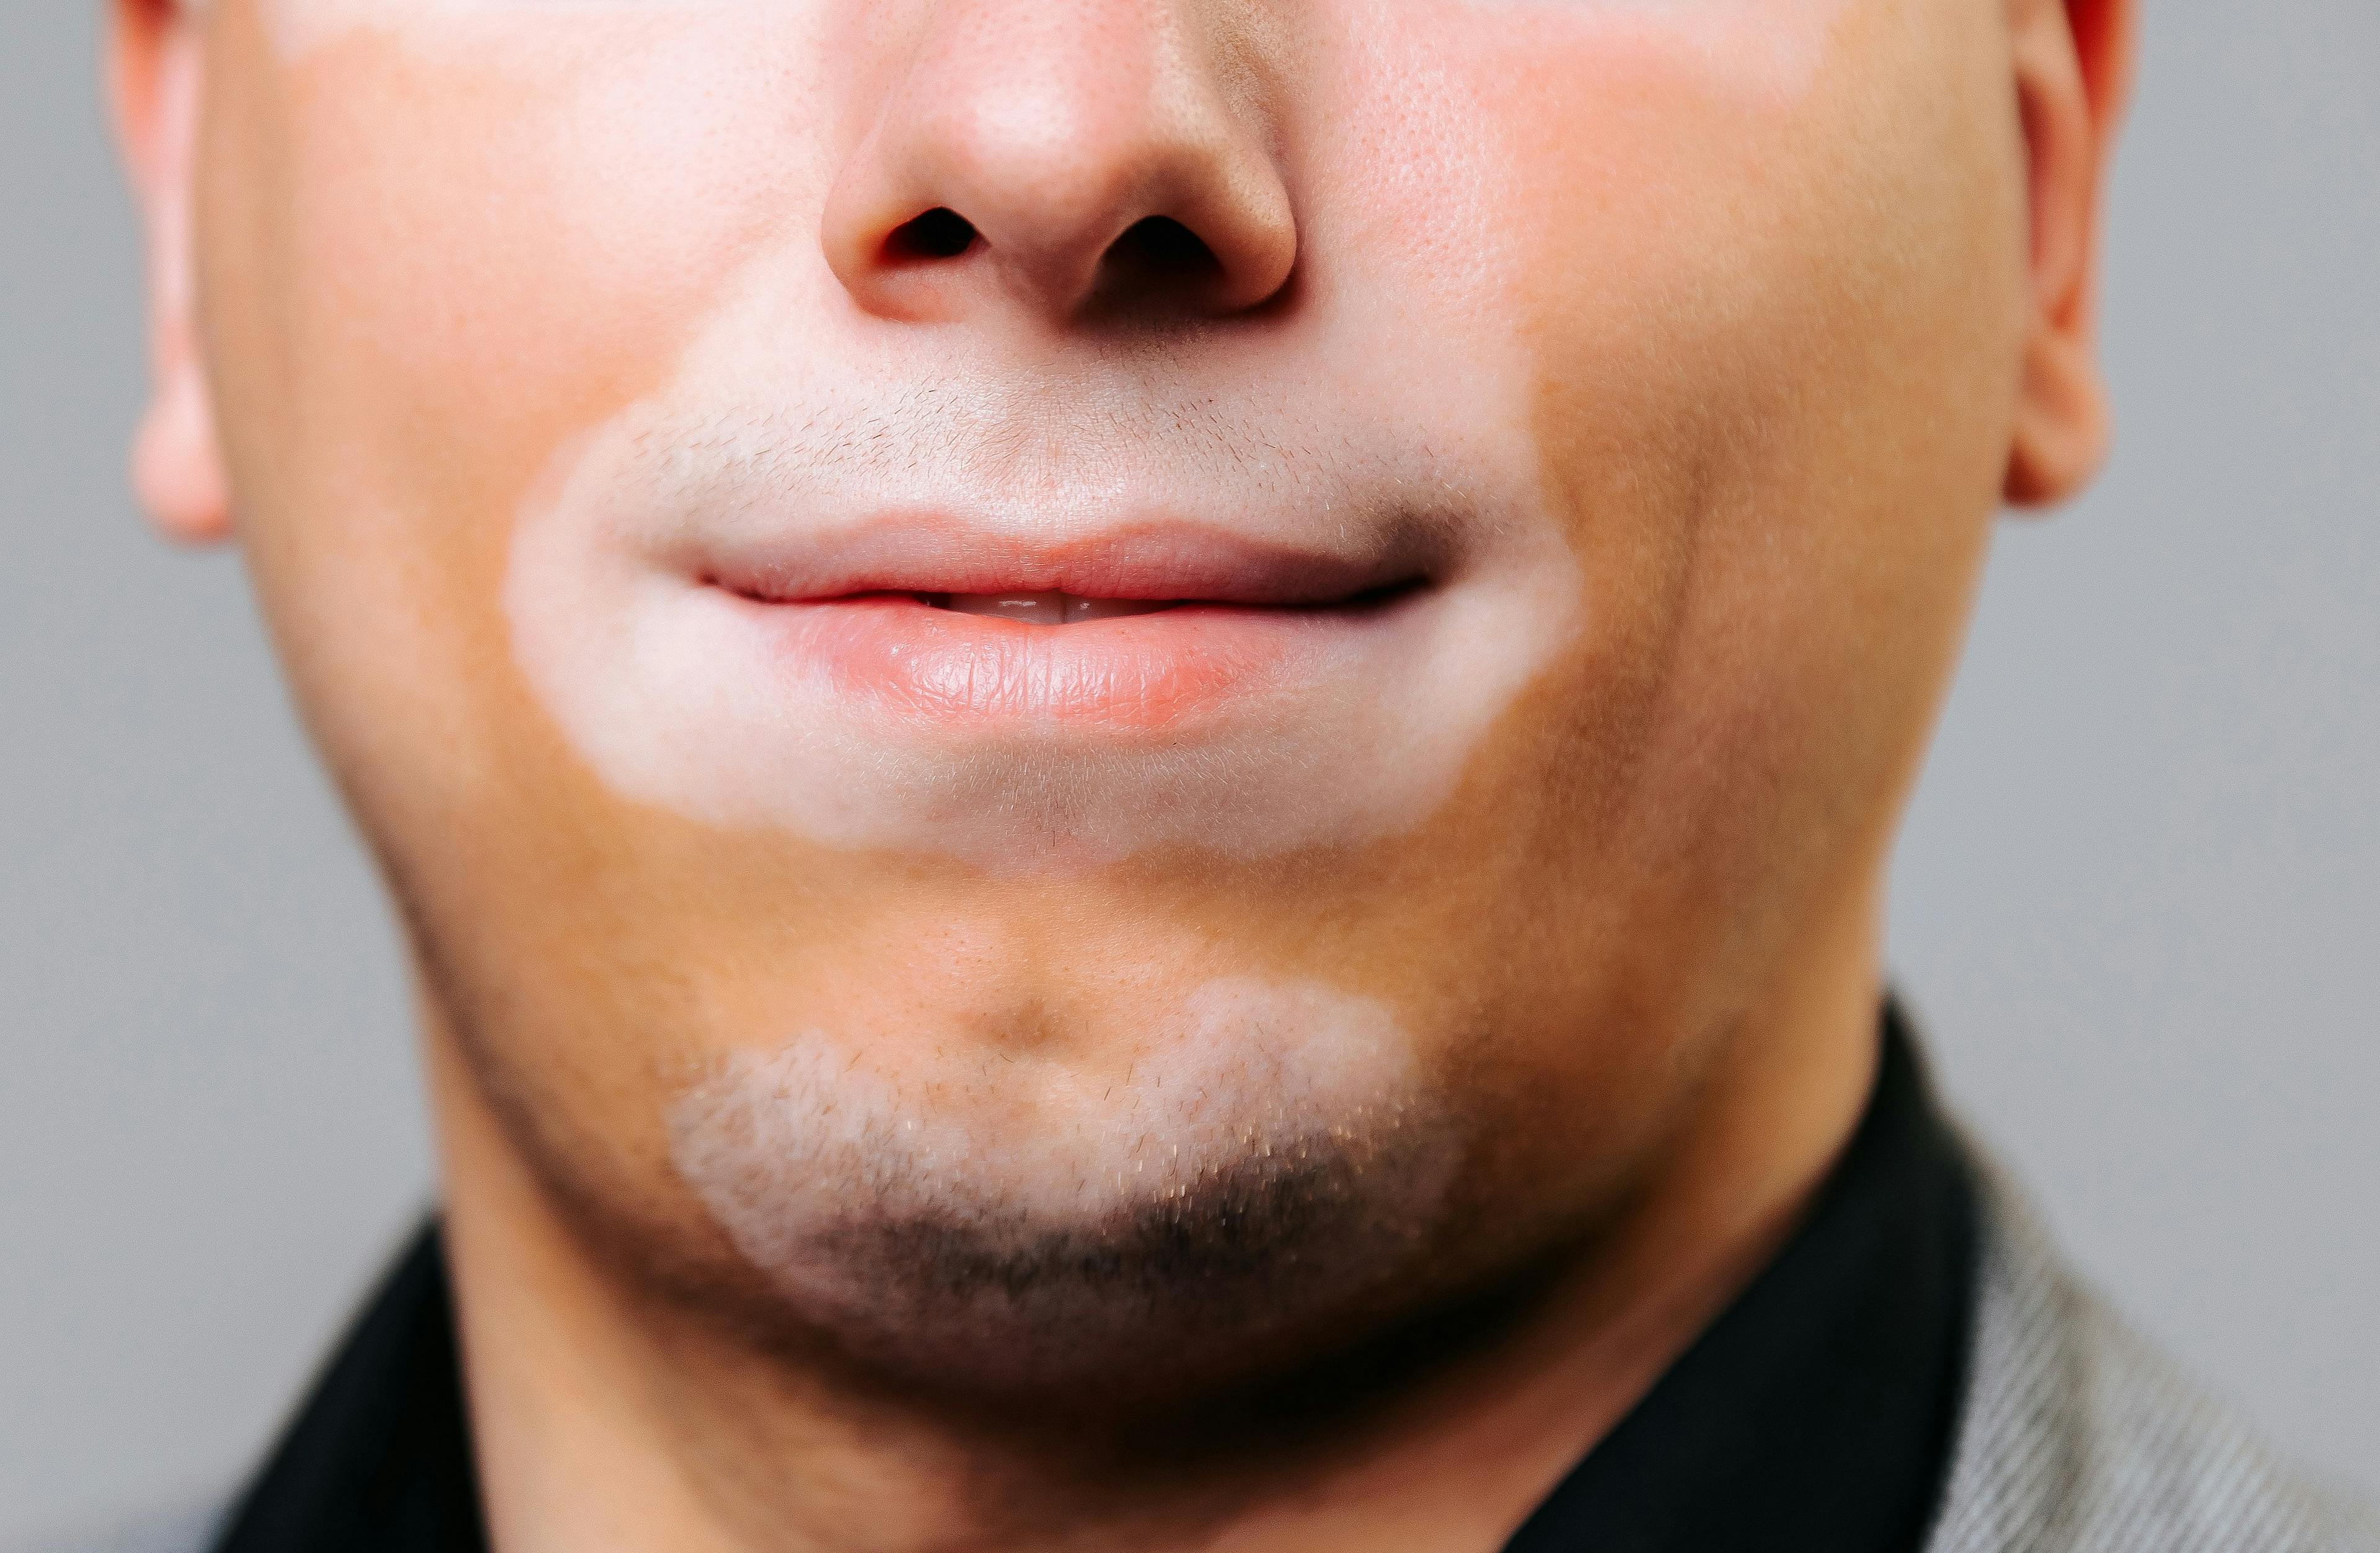 Close up front view part of the face of a young man with vitiligo on a gray background studio shot